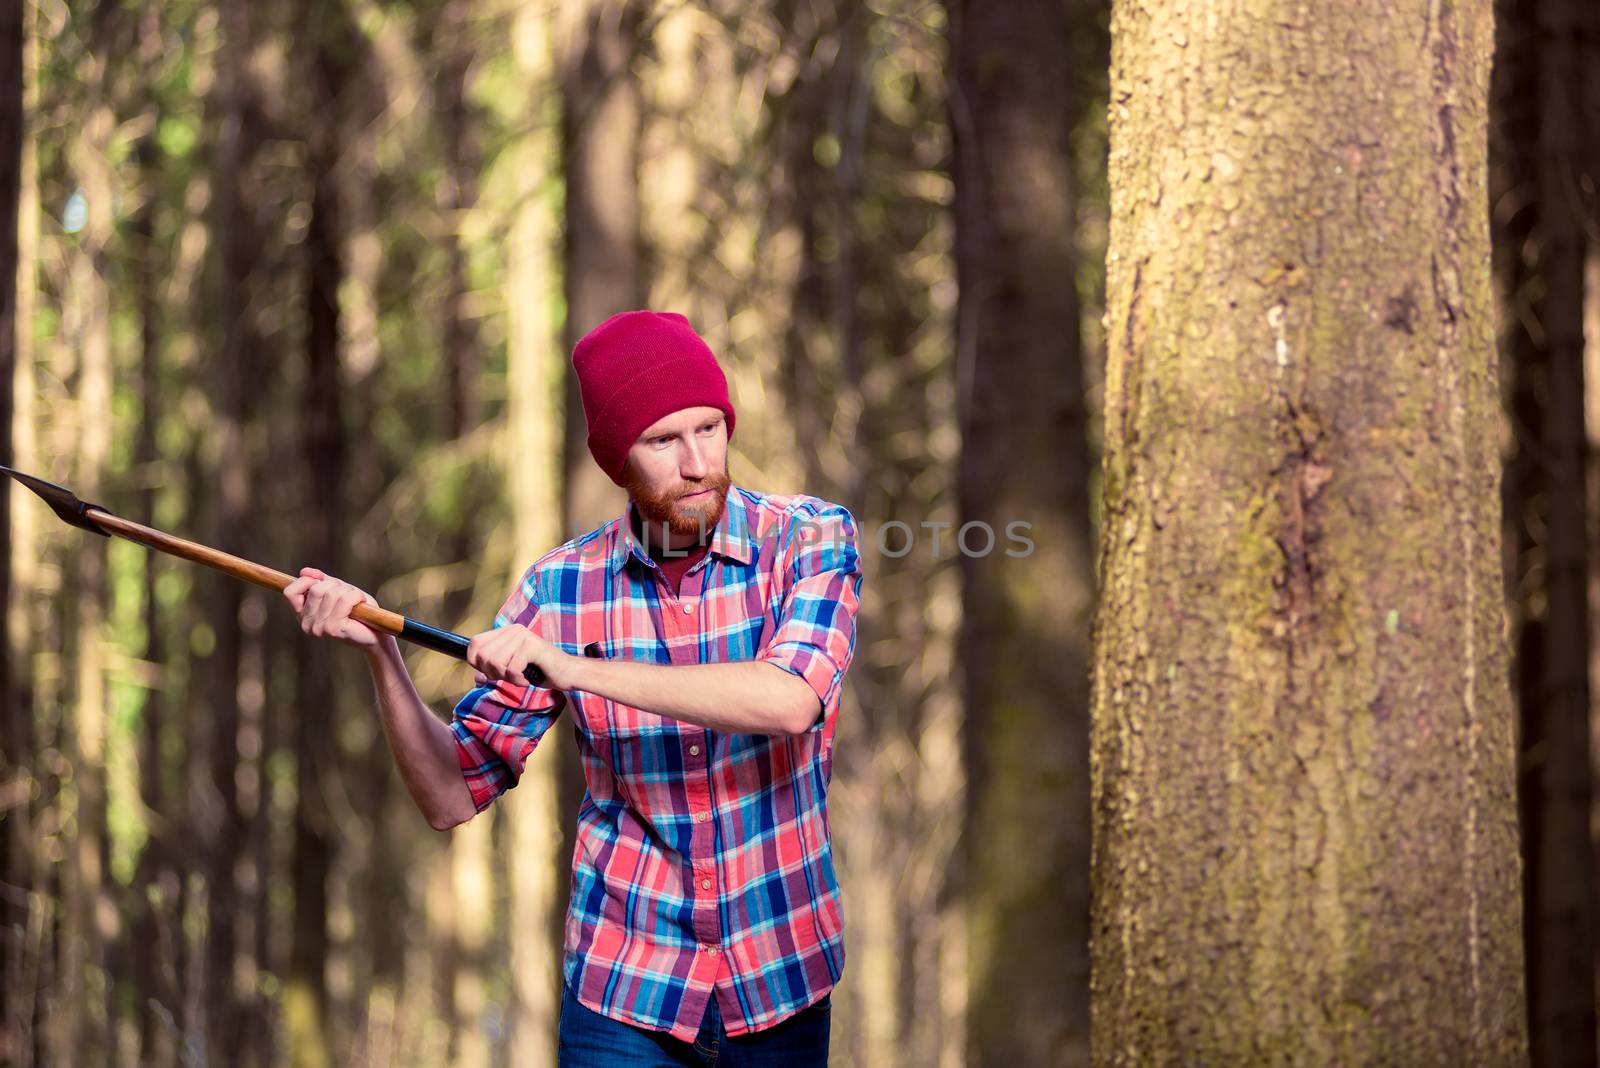 the lumberjack swung his ax to cut a tree into the forest